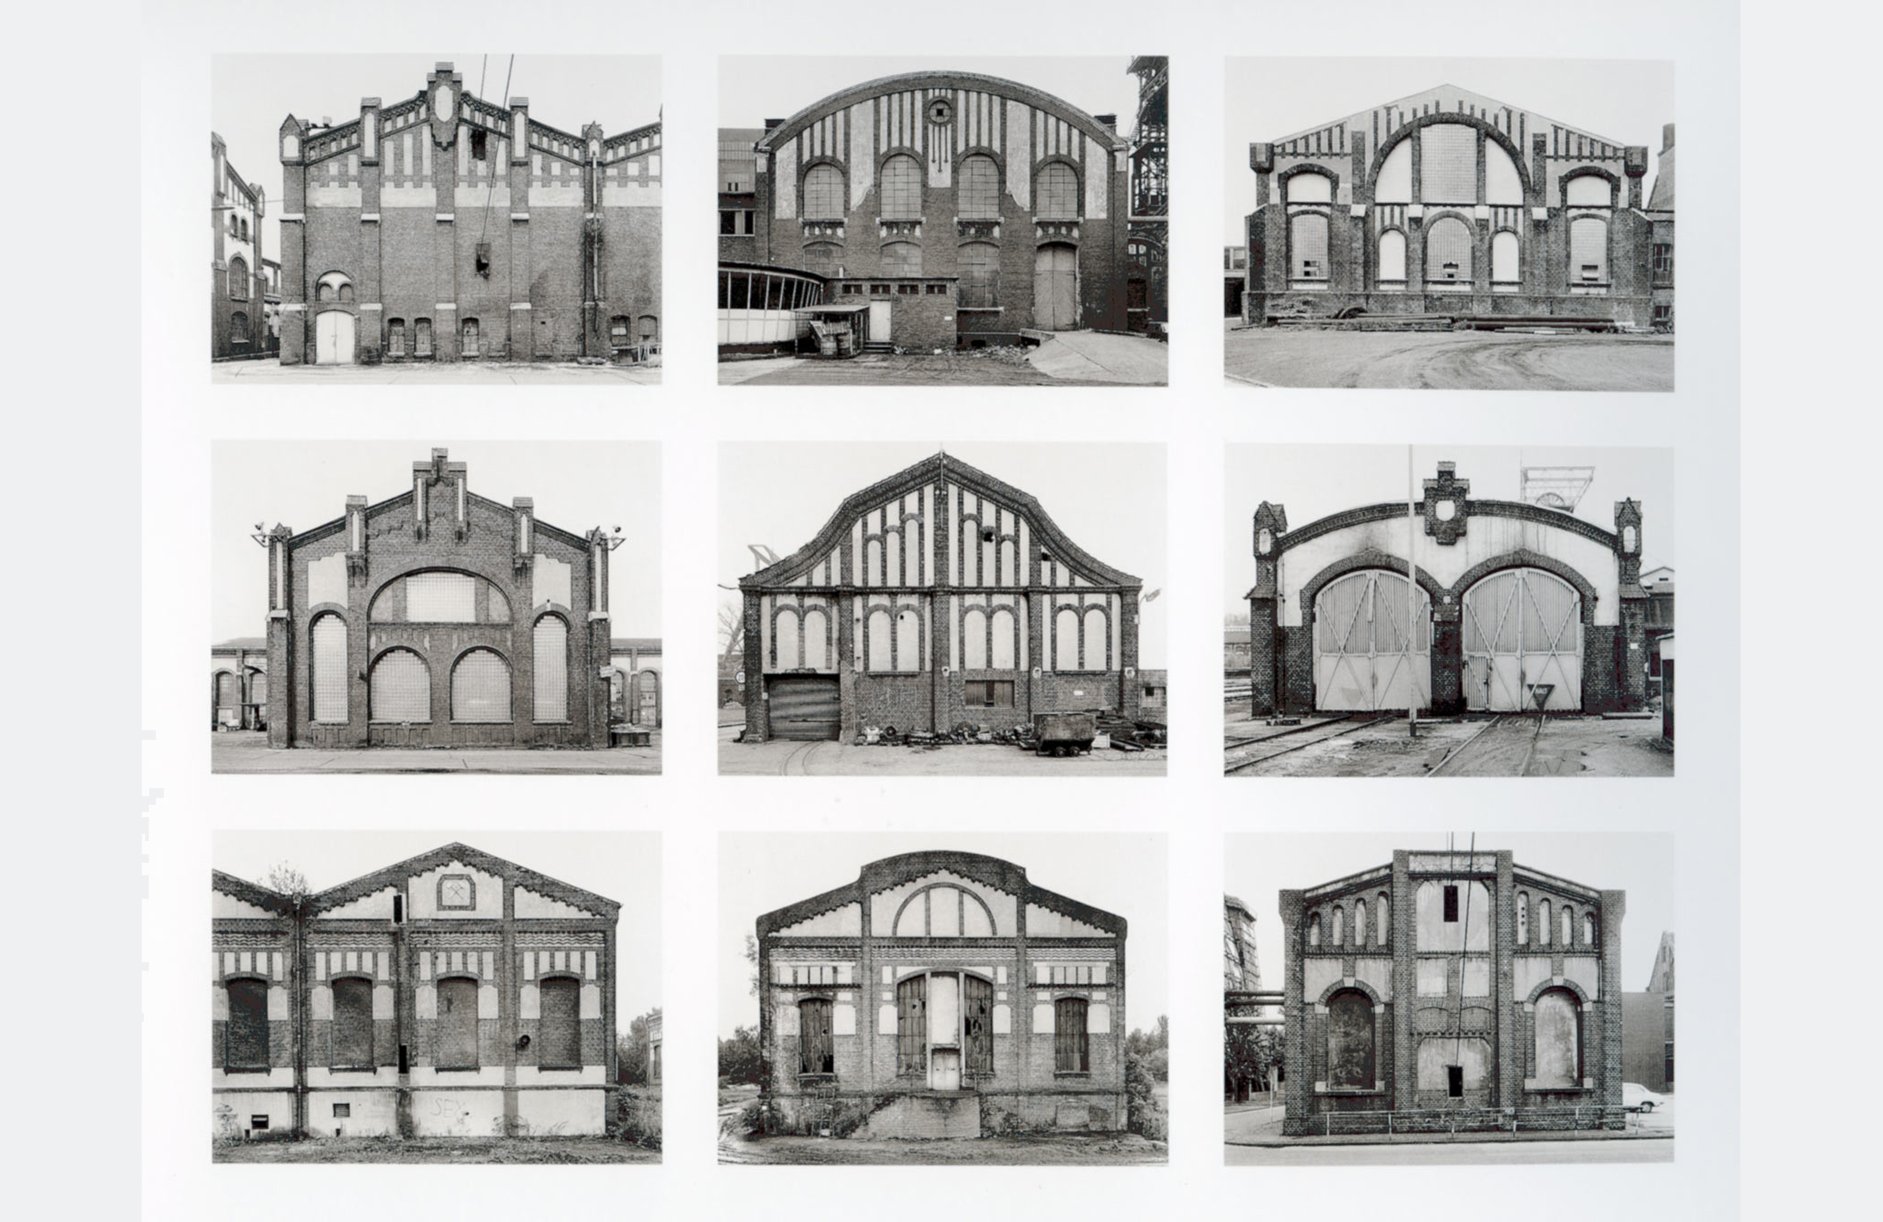 Photographs of the entry gates of factories